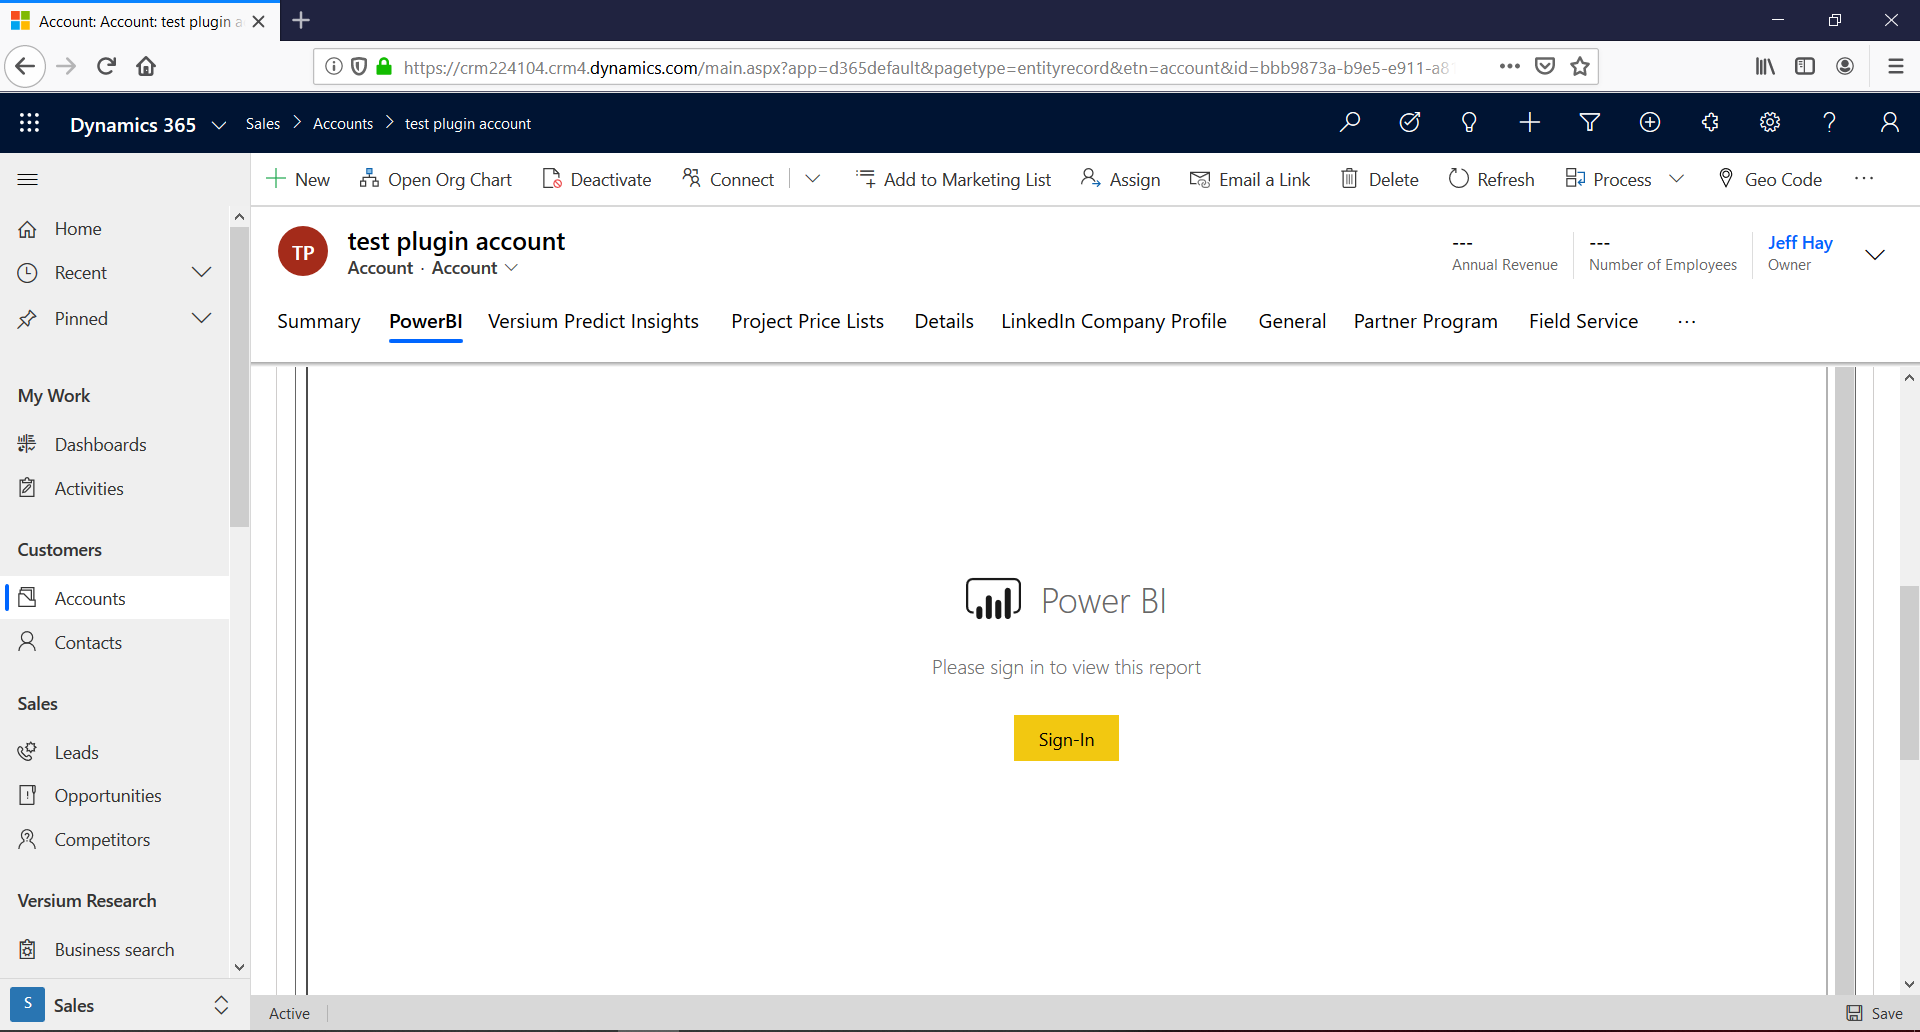 Power BI Embedded in Form - Sign in Request